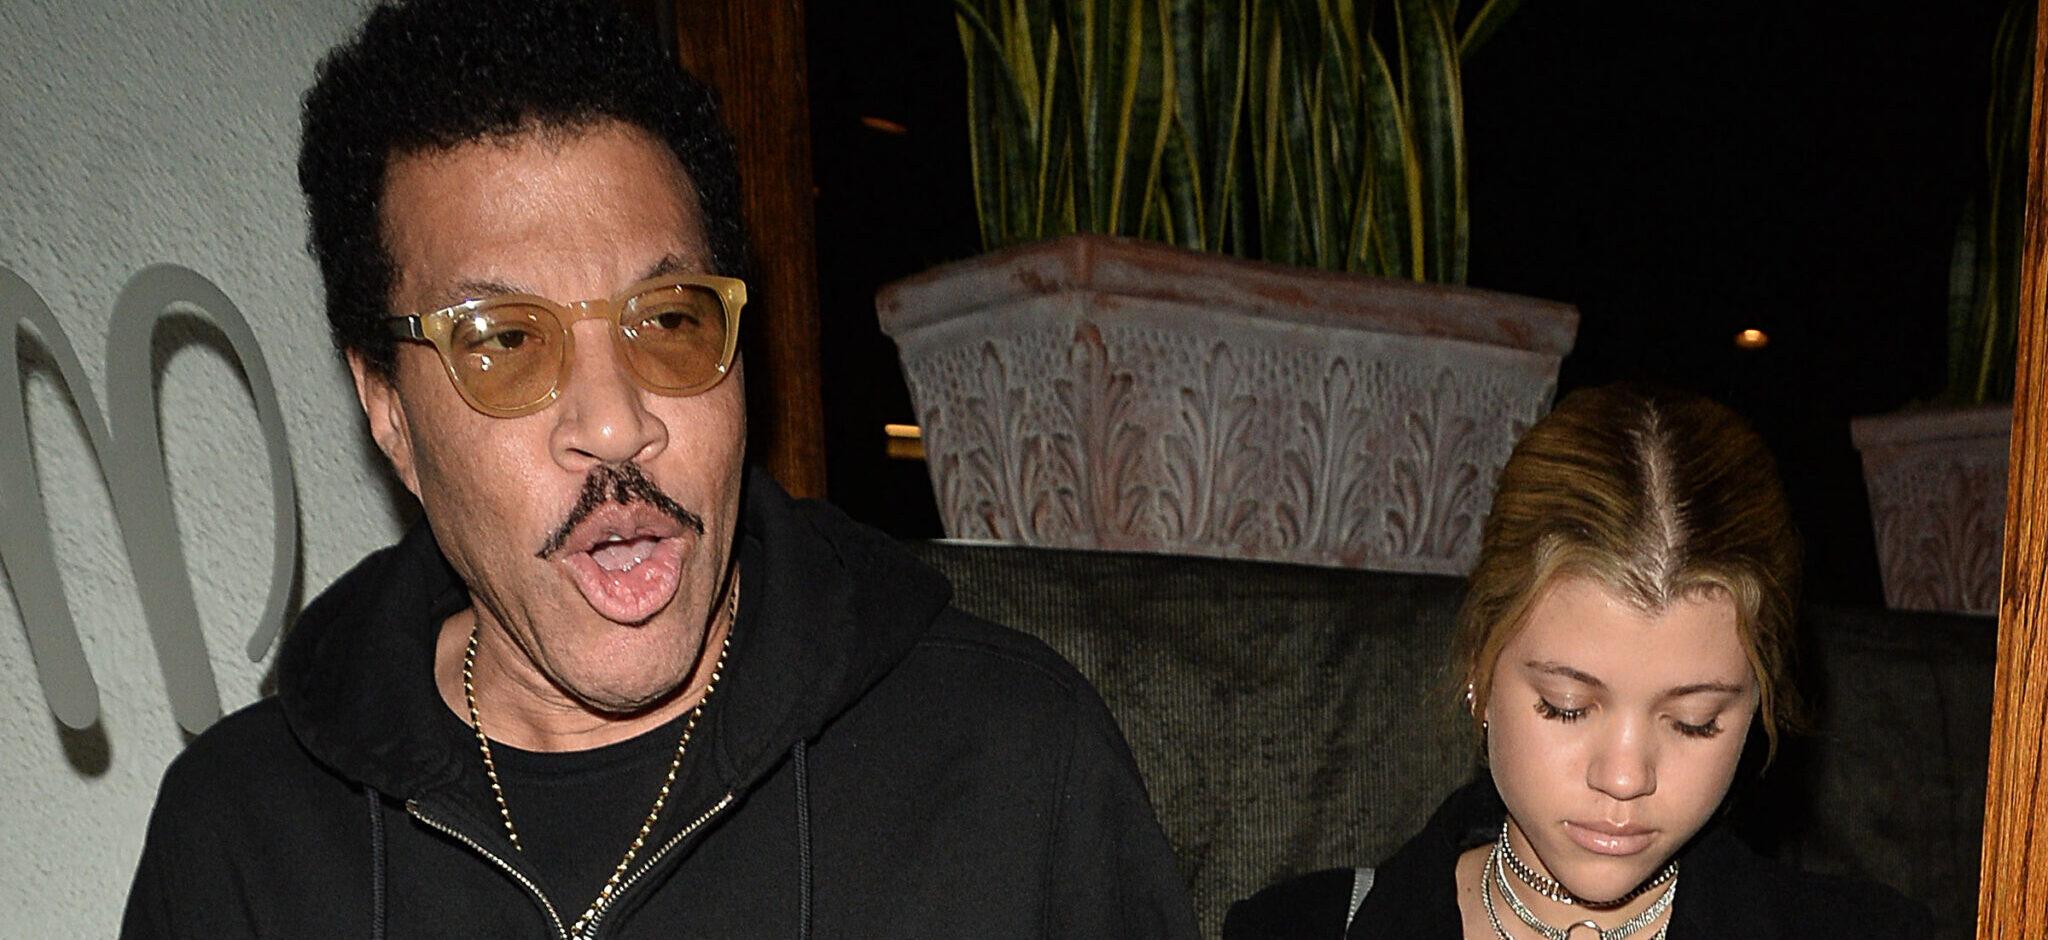 Sofia Richie Cuts Honeymoon Short To Support Dad Lionel Richie At Coronation